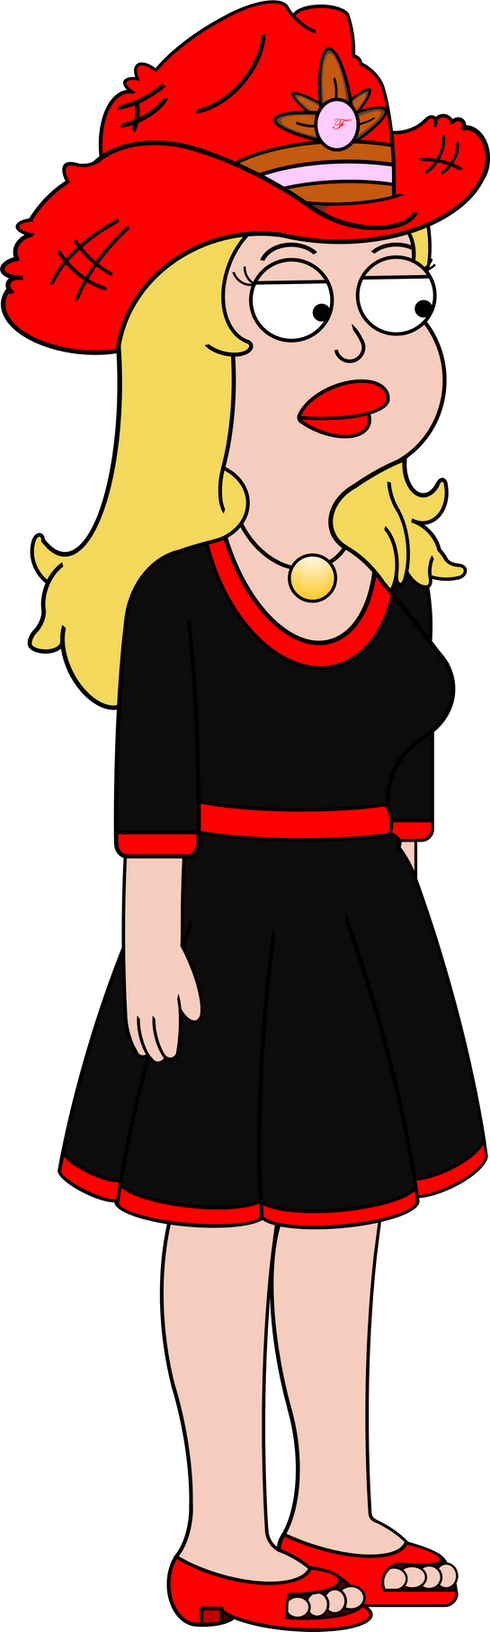 Francine Smith Yeehaw Completed By Rickyfl1975 On Deviantart